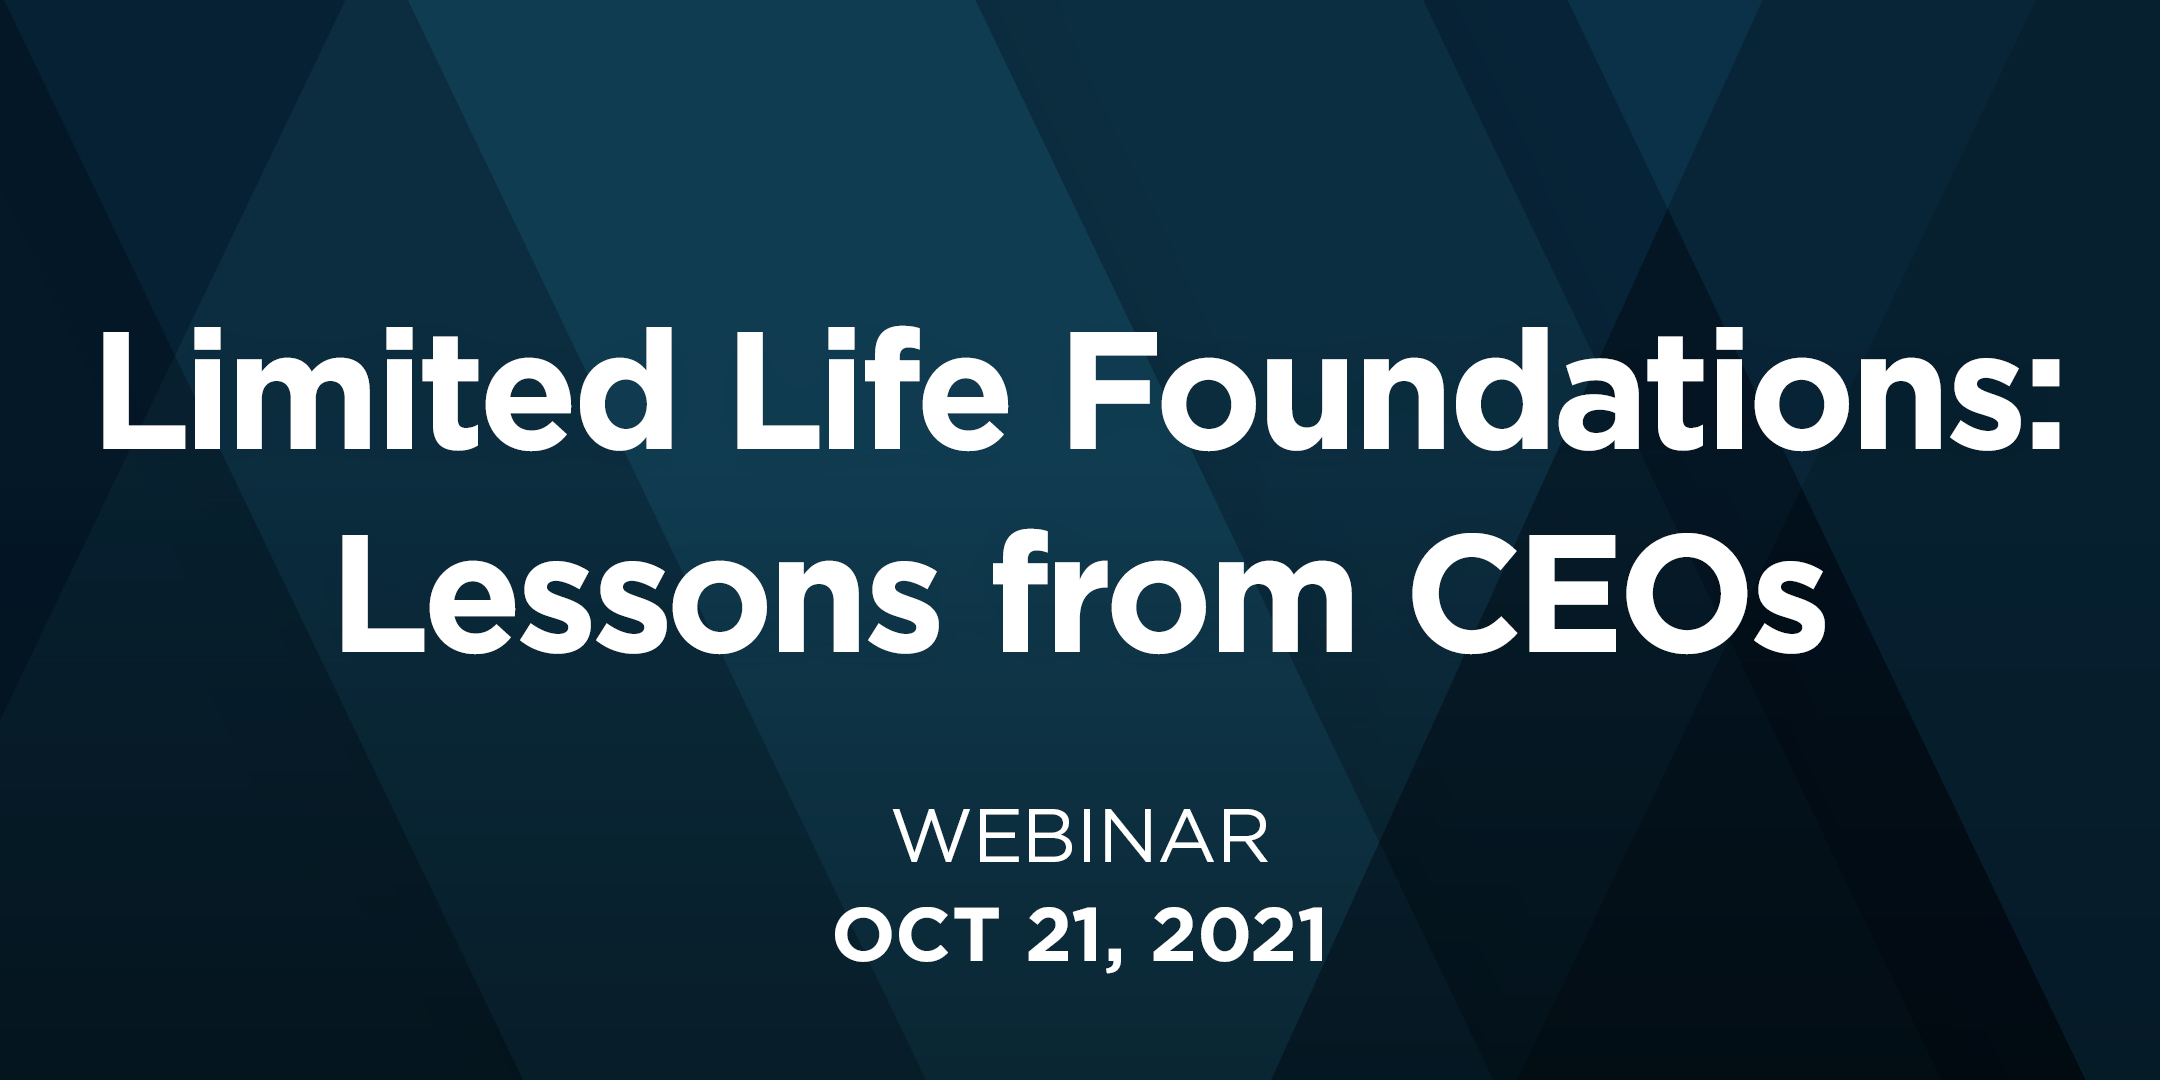 Limited Life Foundations: Lessons from CEOs